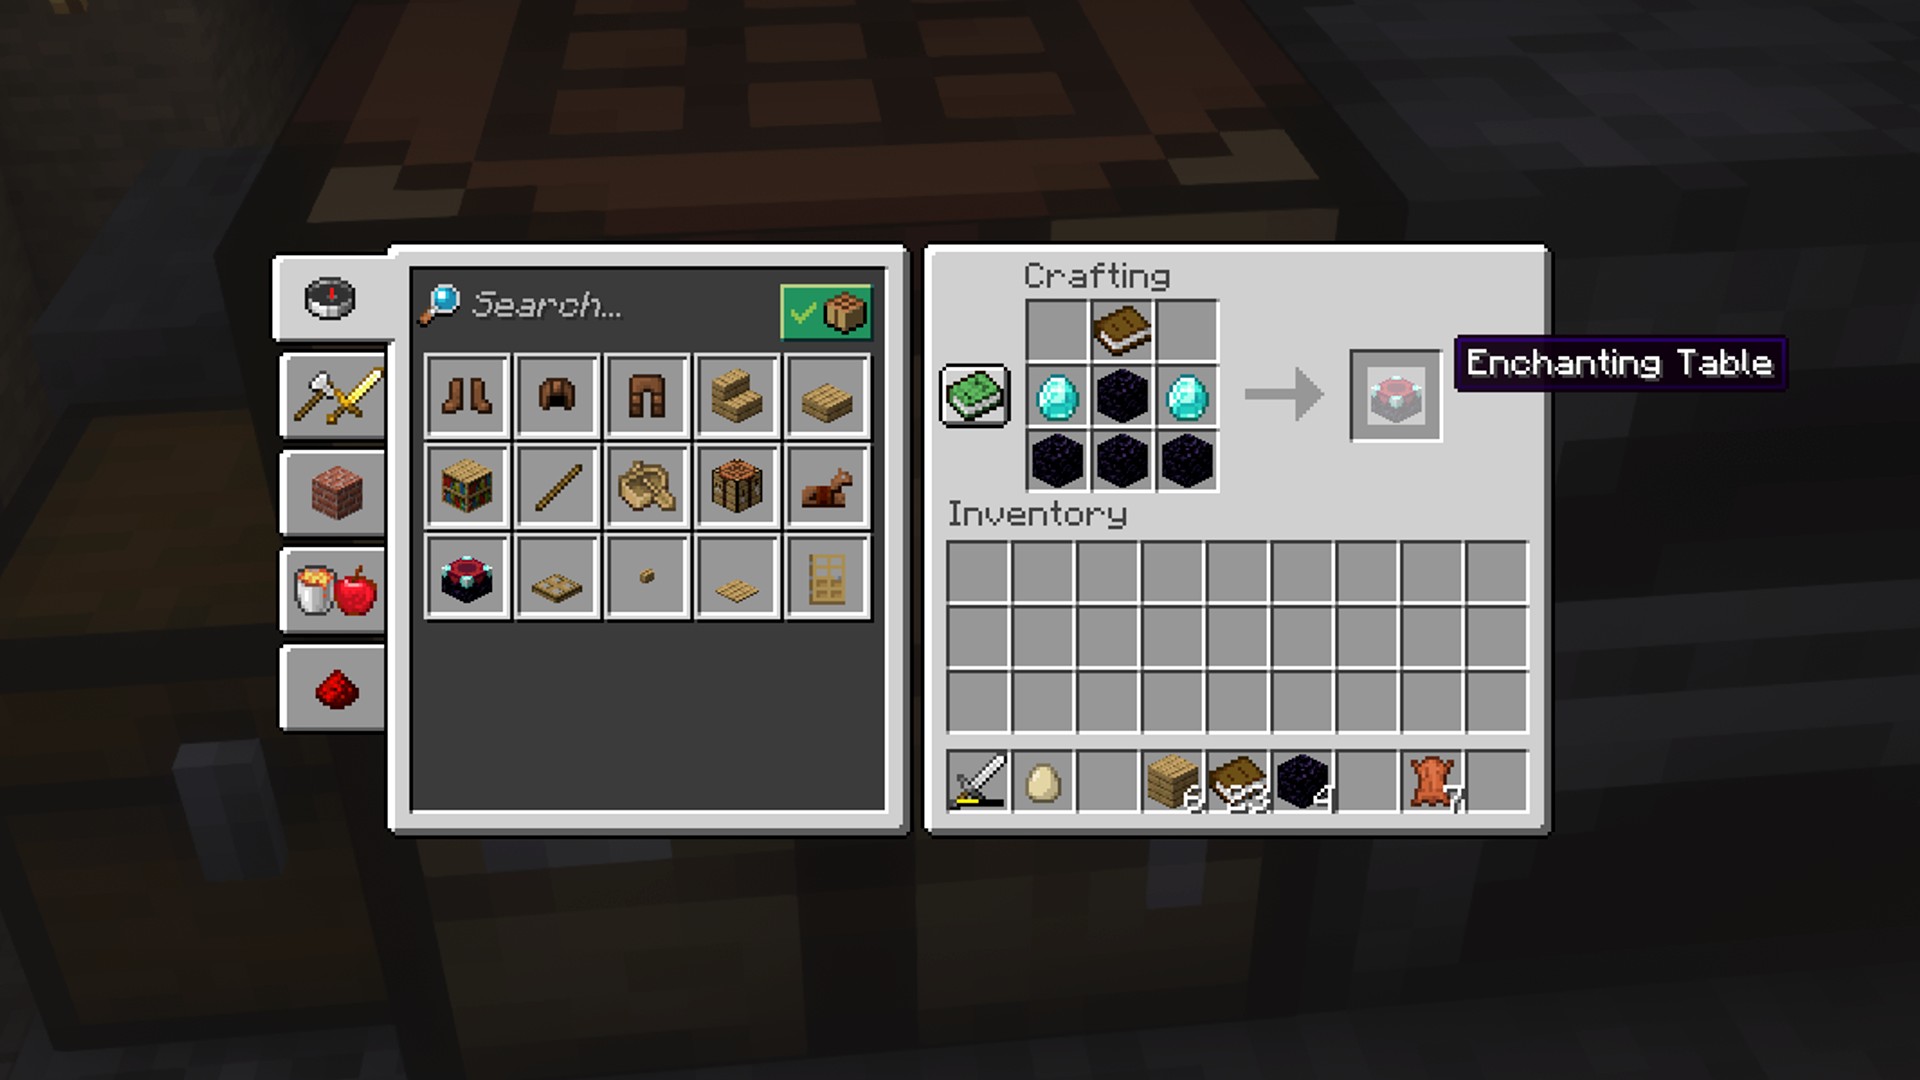 How To Use Minecraft Tools, Armor, and Anvils - dummies